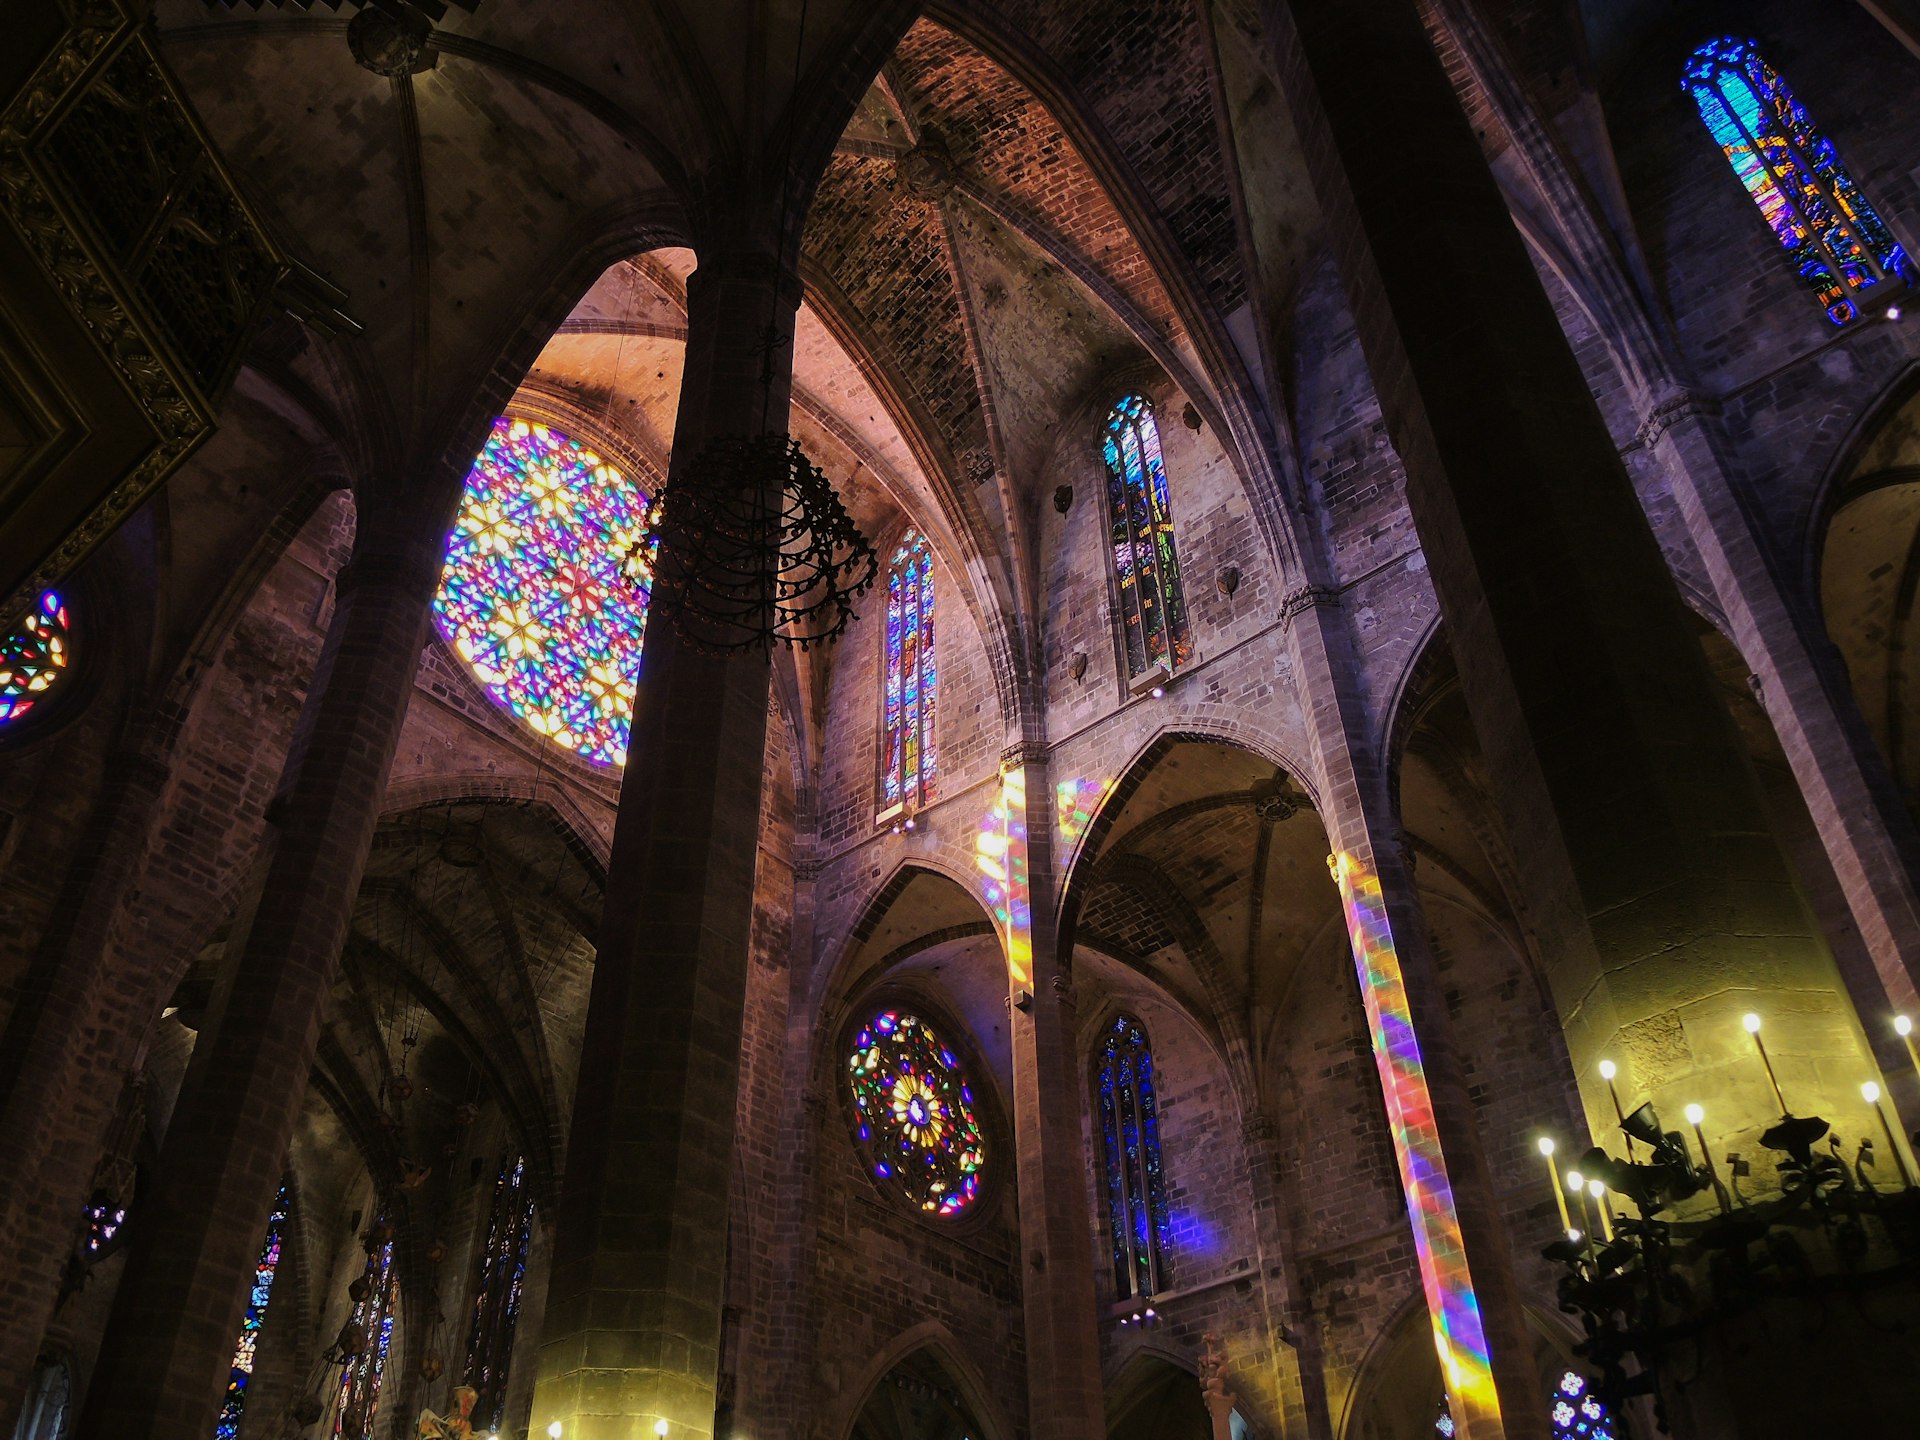 The rose window seen from the interior of Palma de Mallorca's Gothic cathedral